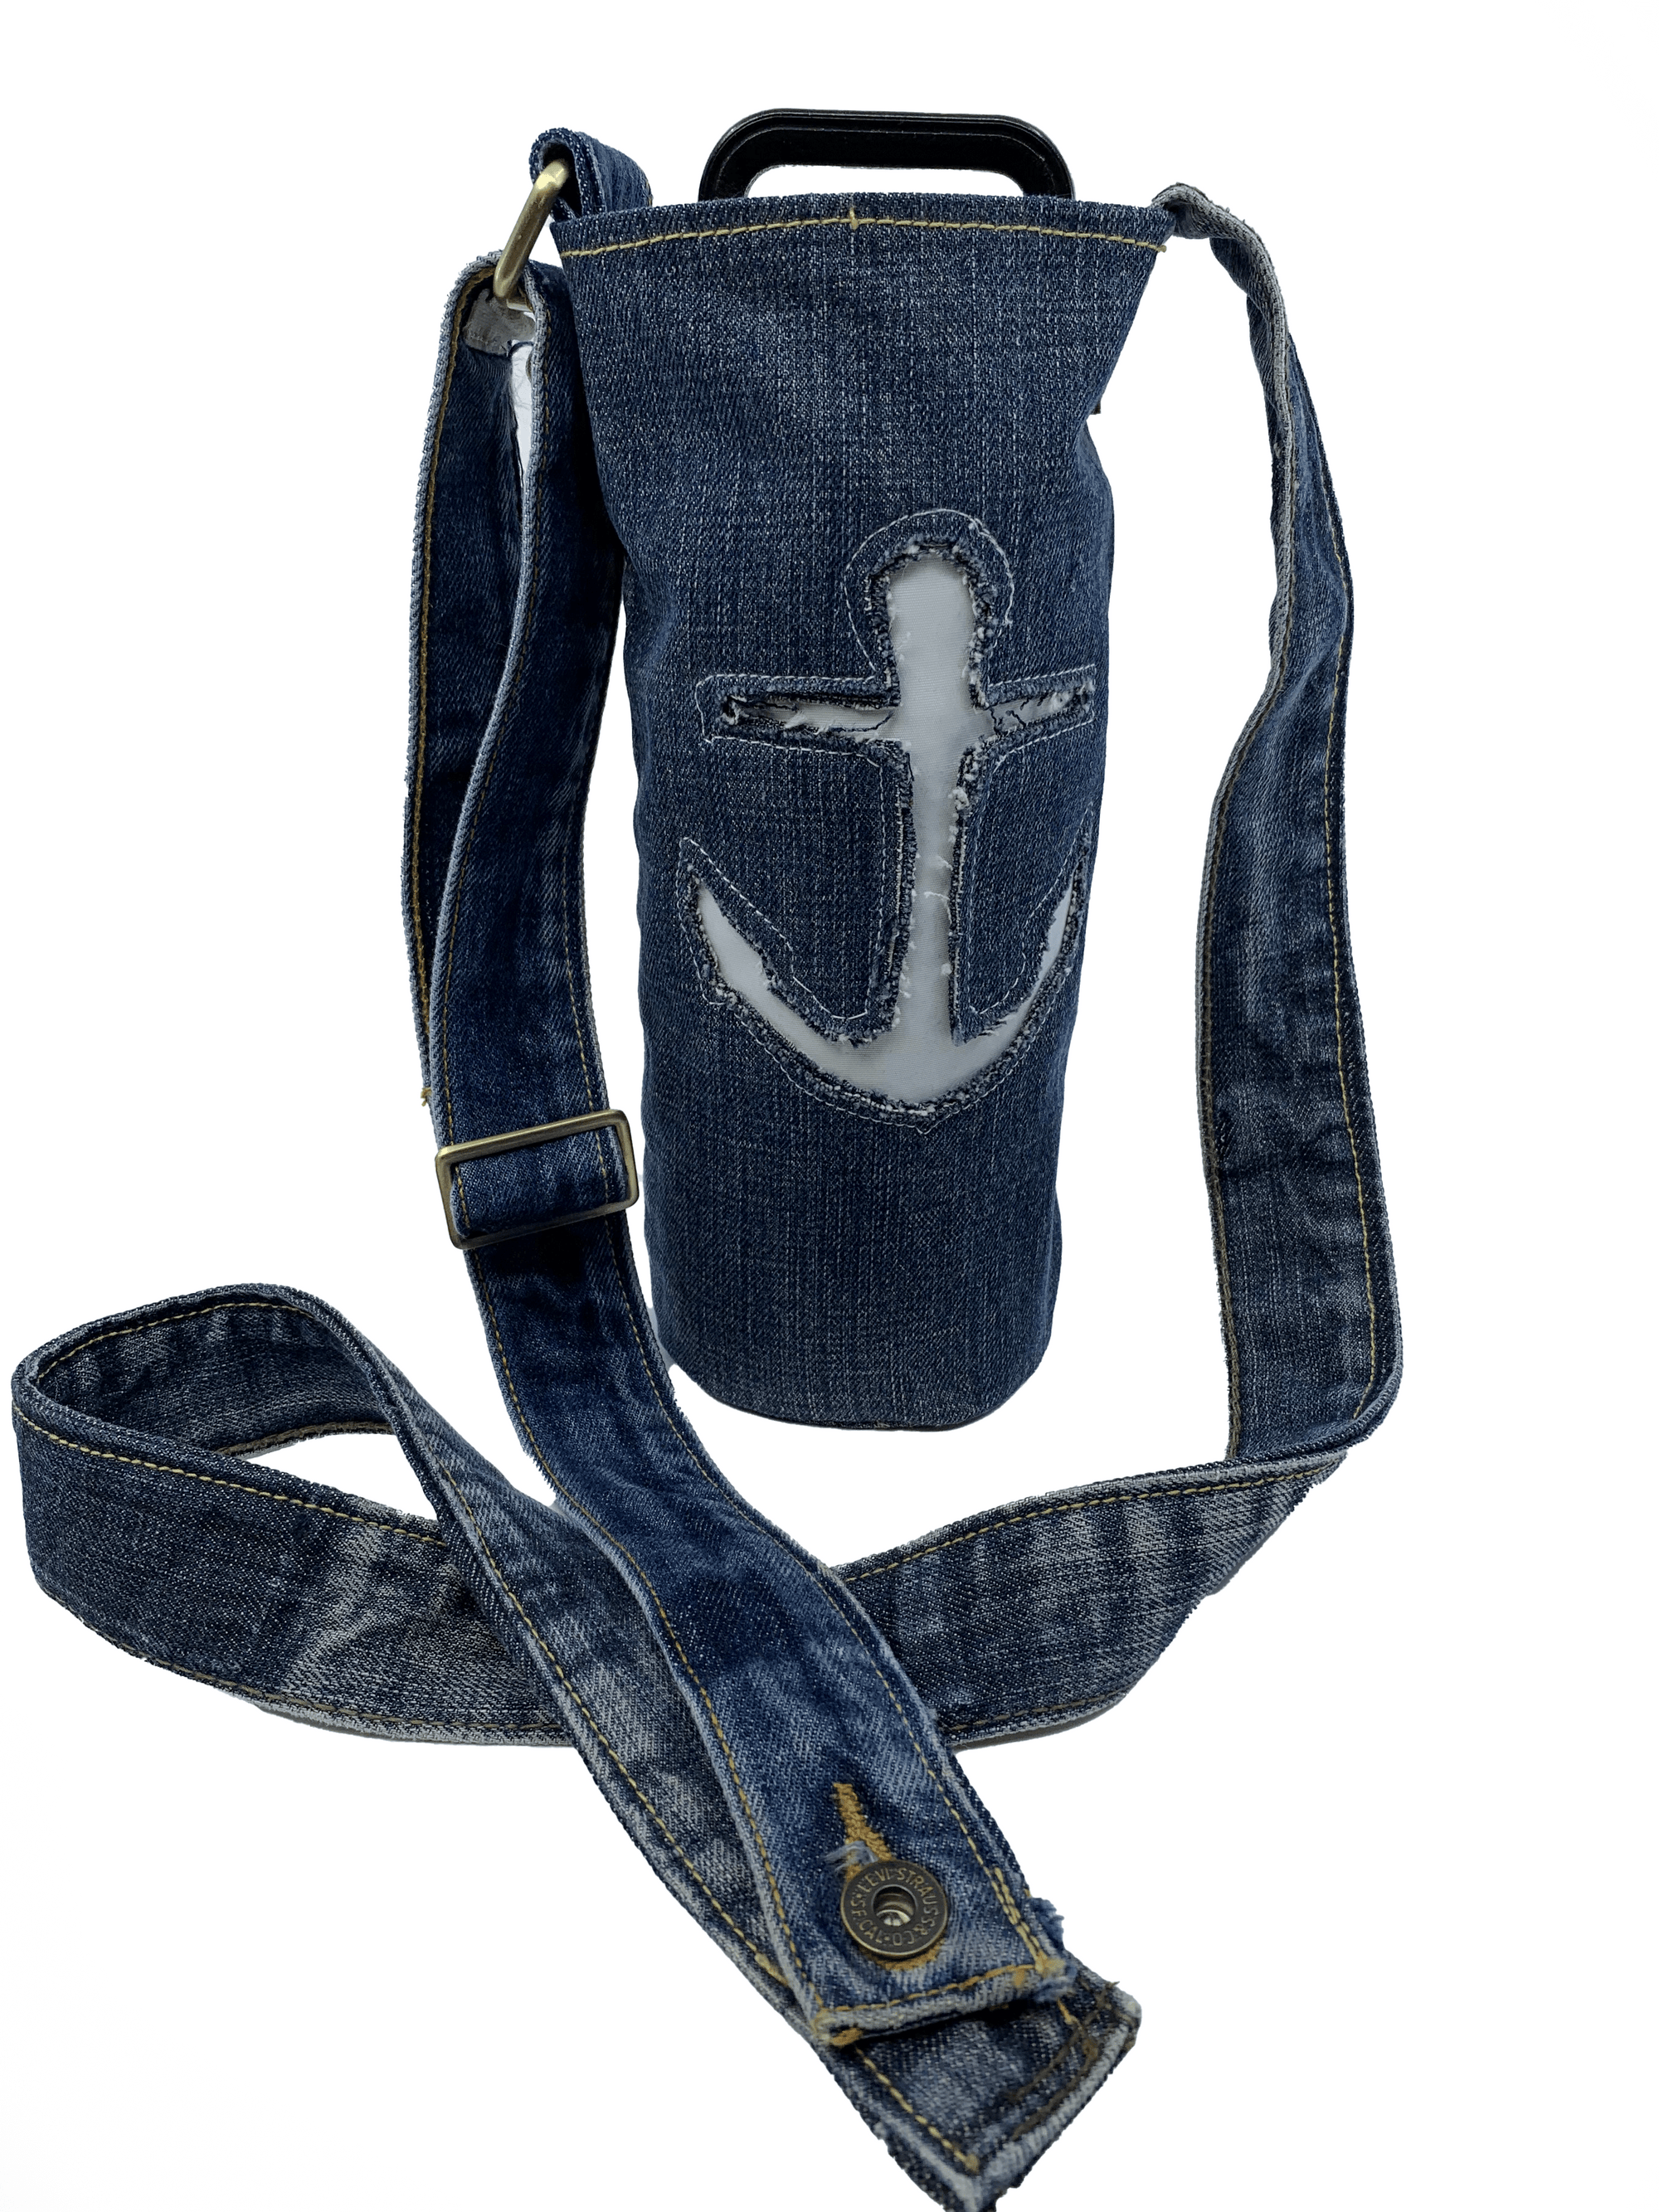 Circular Threads Upcycled Bags and Totes Recycled Denim and Reverse Applique Sailcloth Anchor Water Bottle Tote Bag